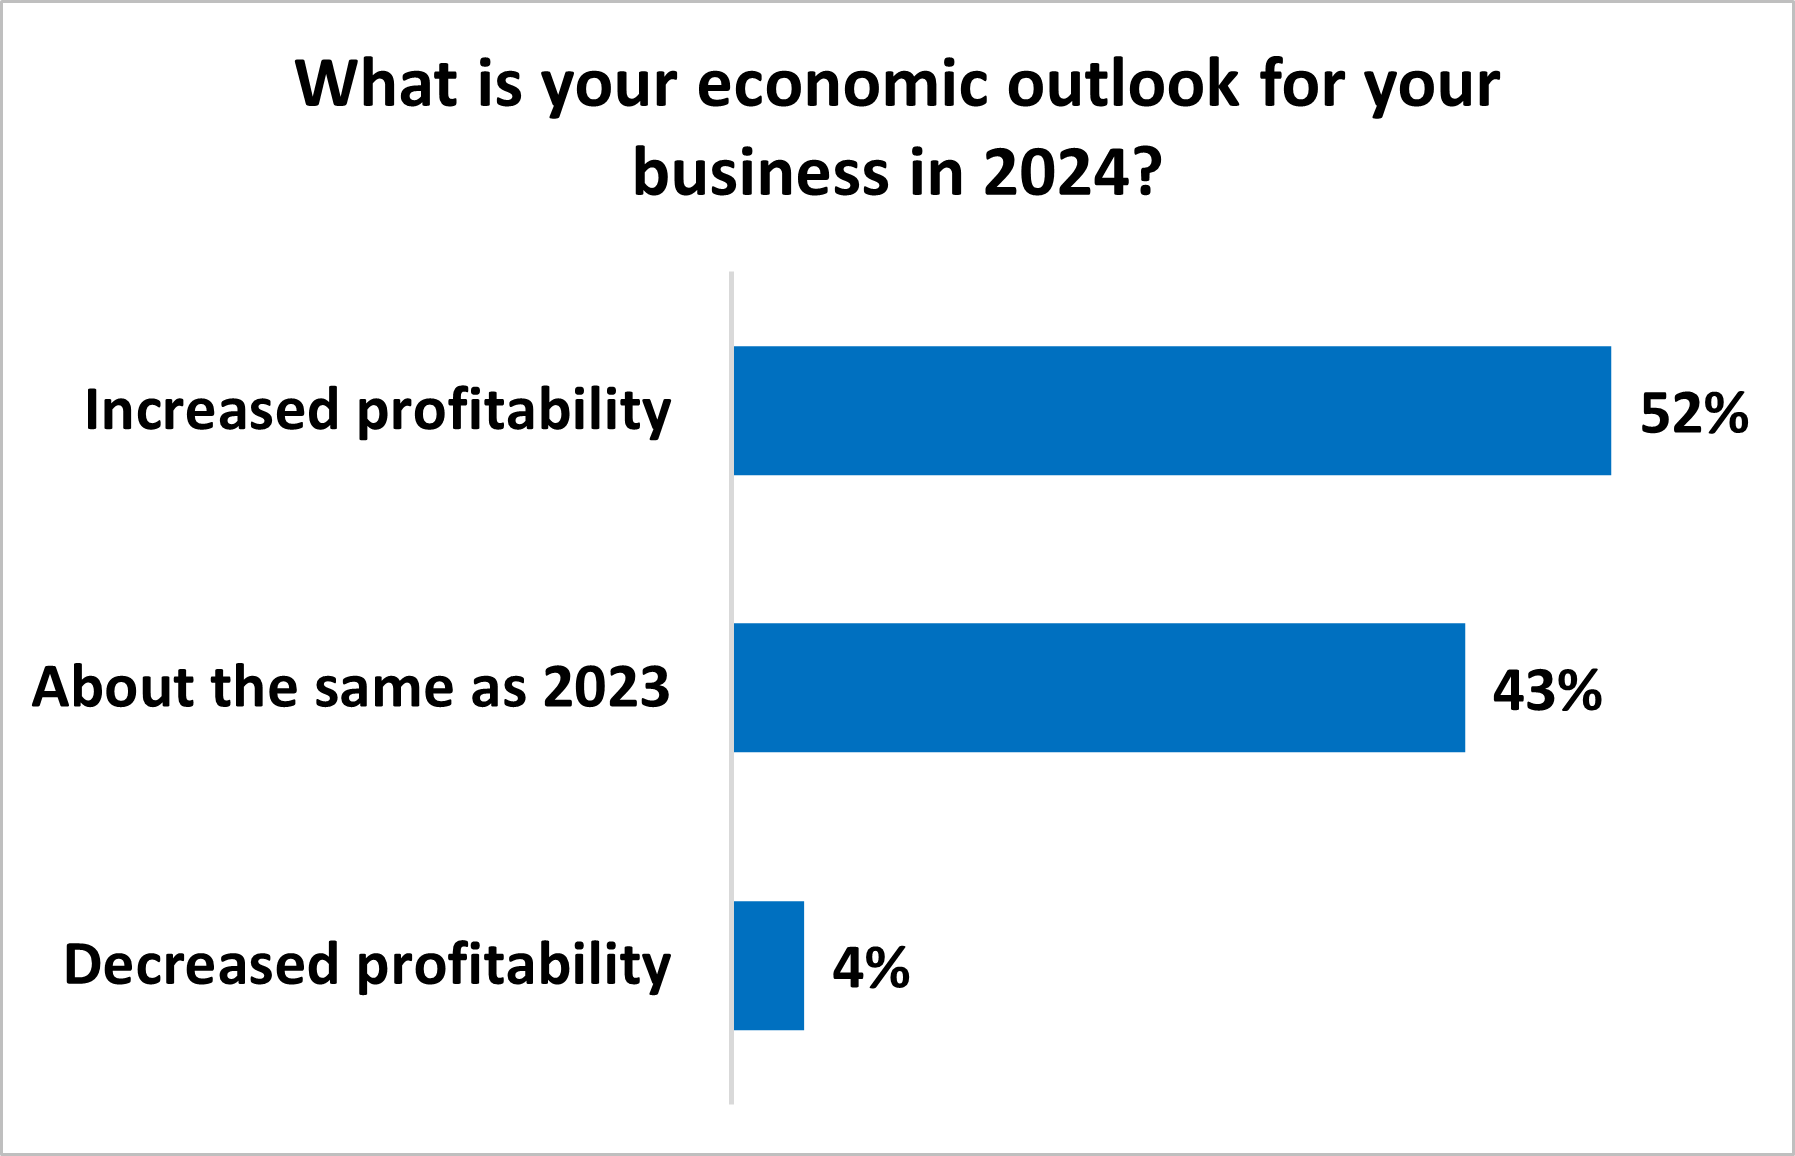 What is your economic outlook for your business in 2024? Increased profitability, 52%. About the same as 2023, 43%. Decreased profitability, 4%.